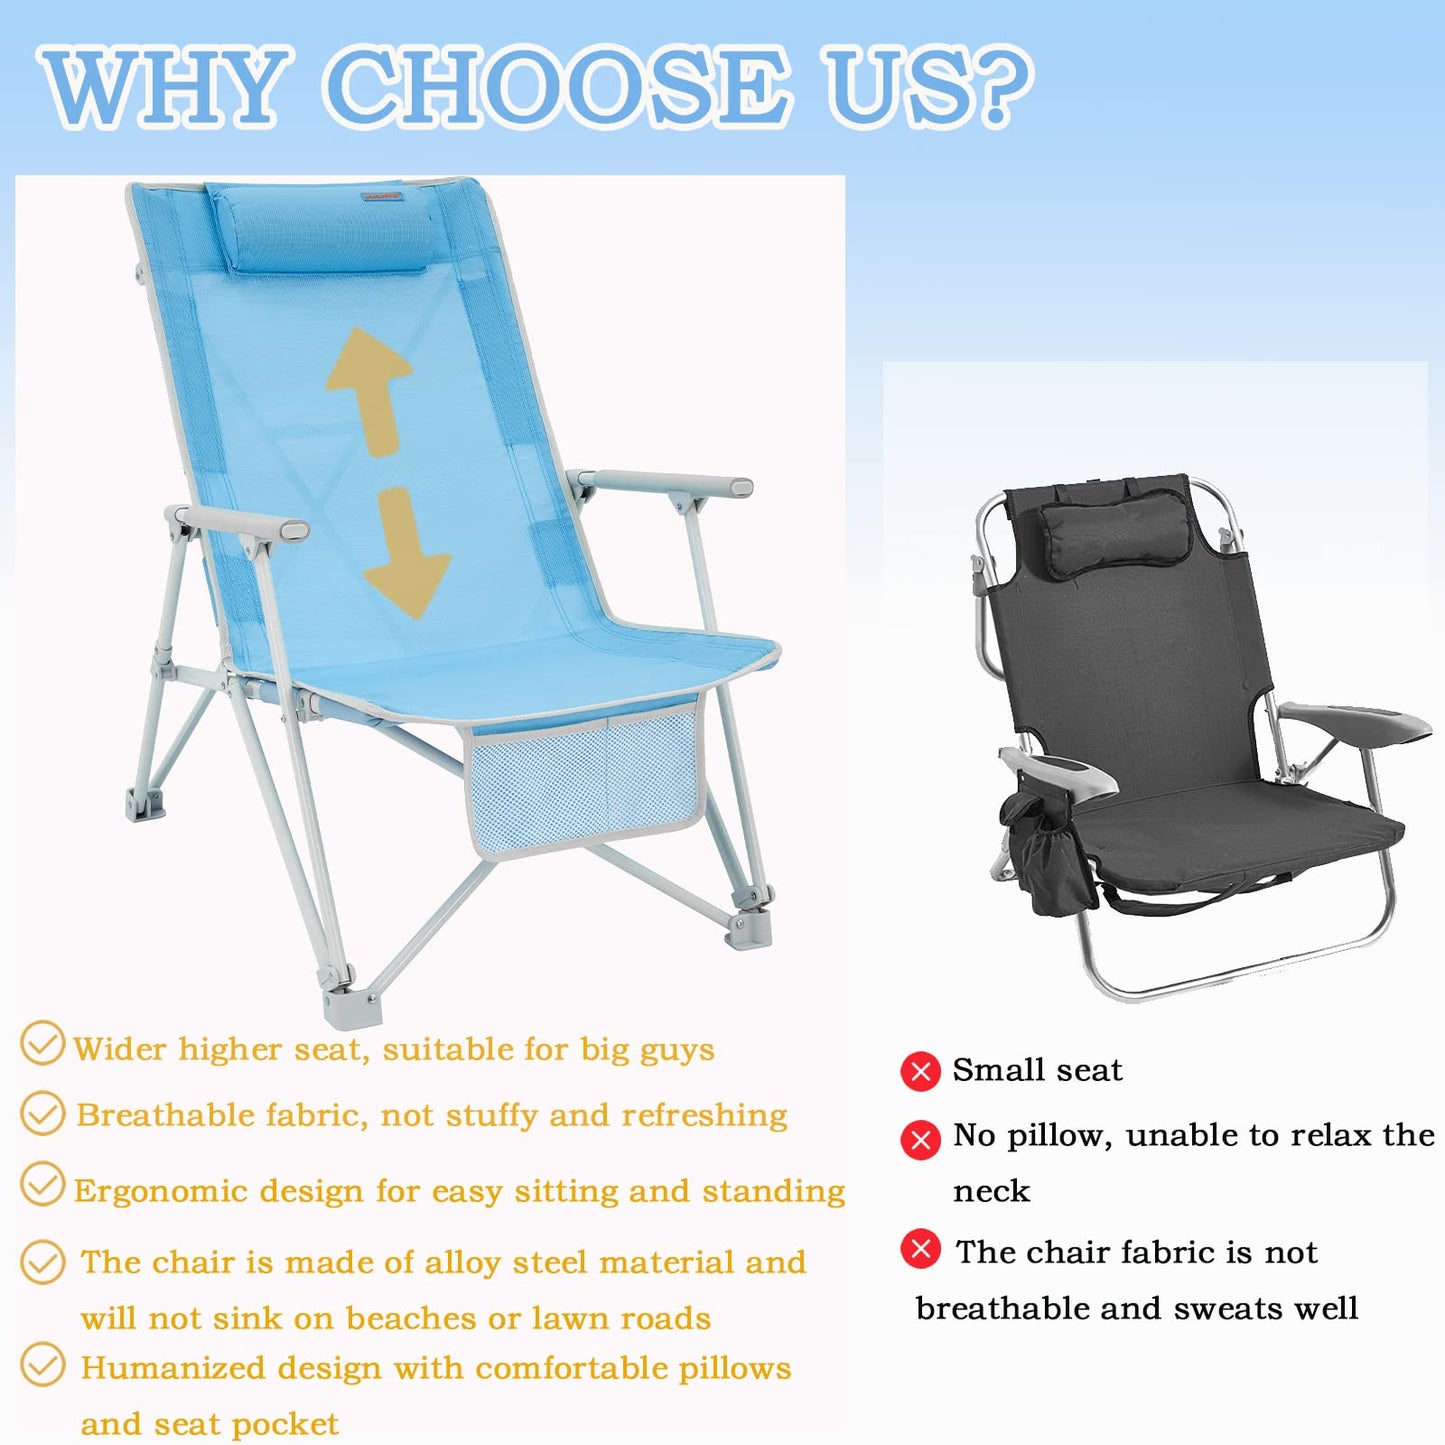 WEJOY 2 Pack Portable High Back Folding Beach Chair